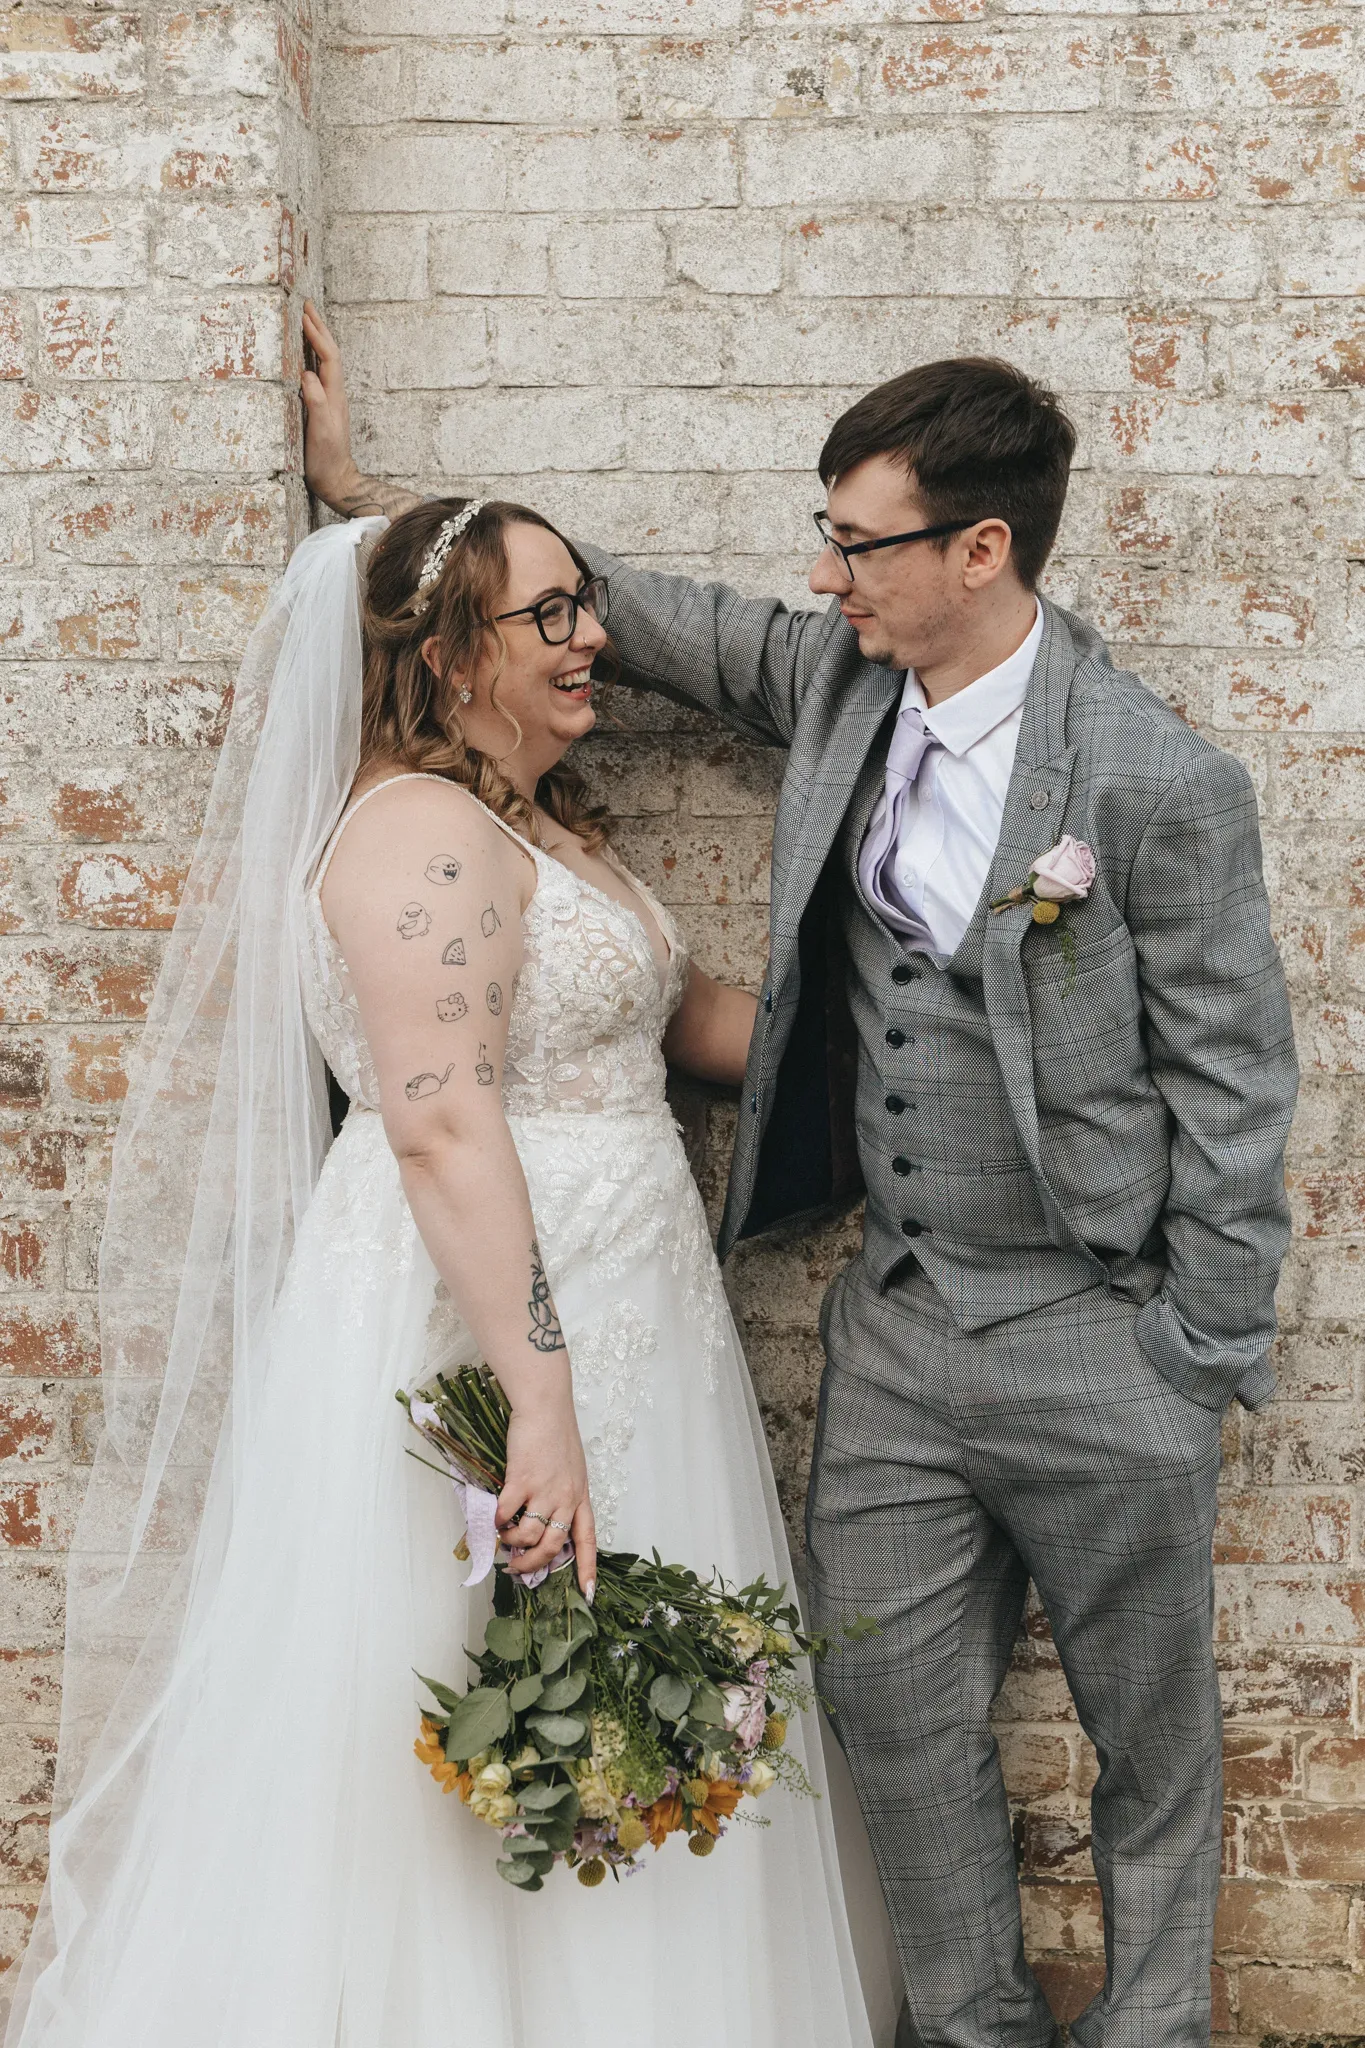 A joyful bride and groom share a candid moment against a brick wall backdrop, the bride holding a bouquet and both dressed in elegant wedding attire.